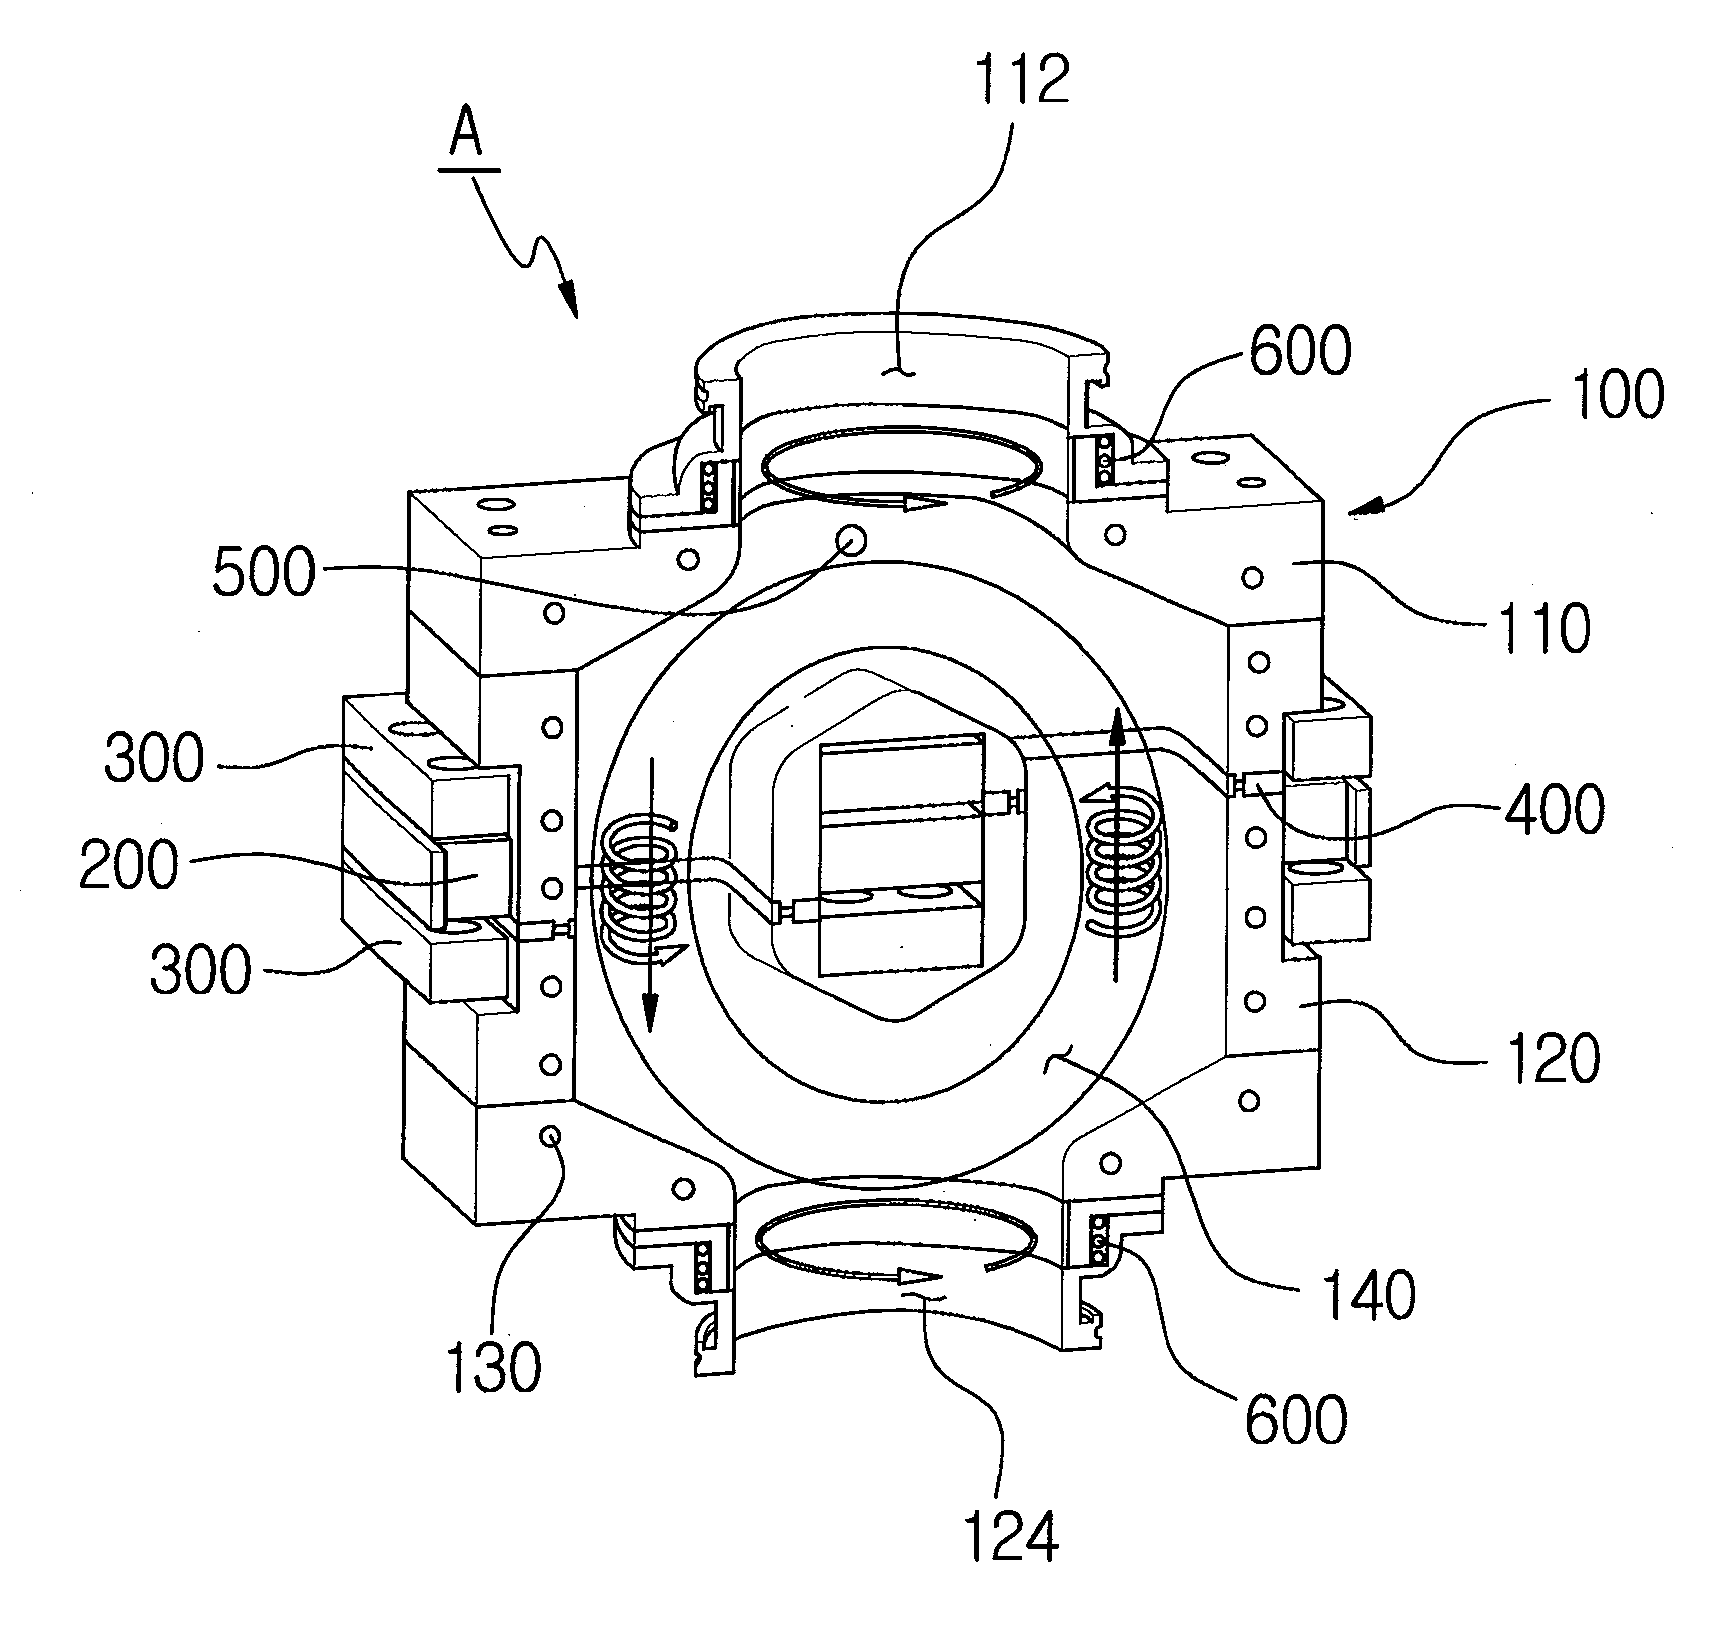 Apparatus for decomposing perfluorocarbon and harmful gas using high-density confined plasma source